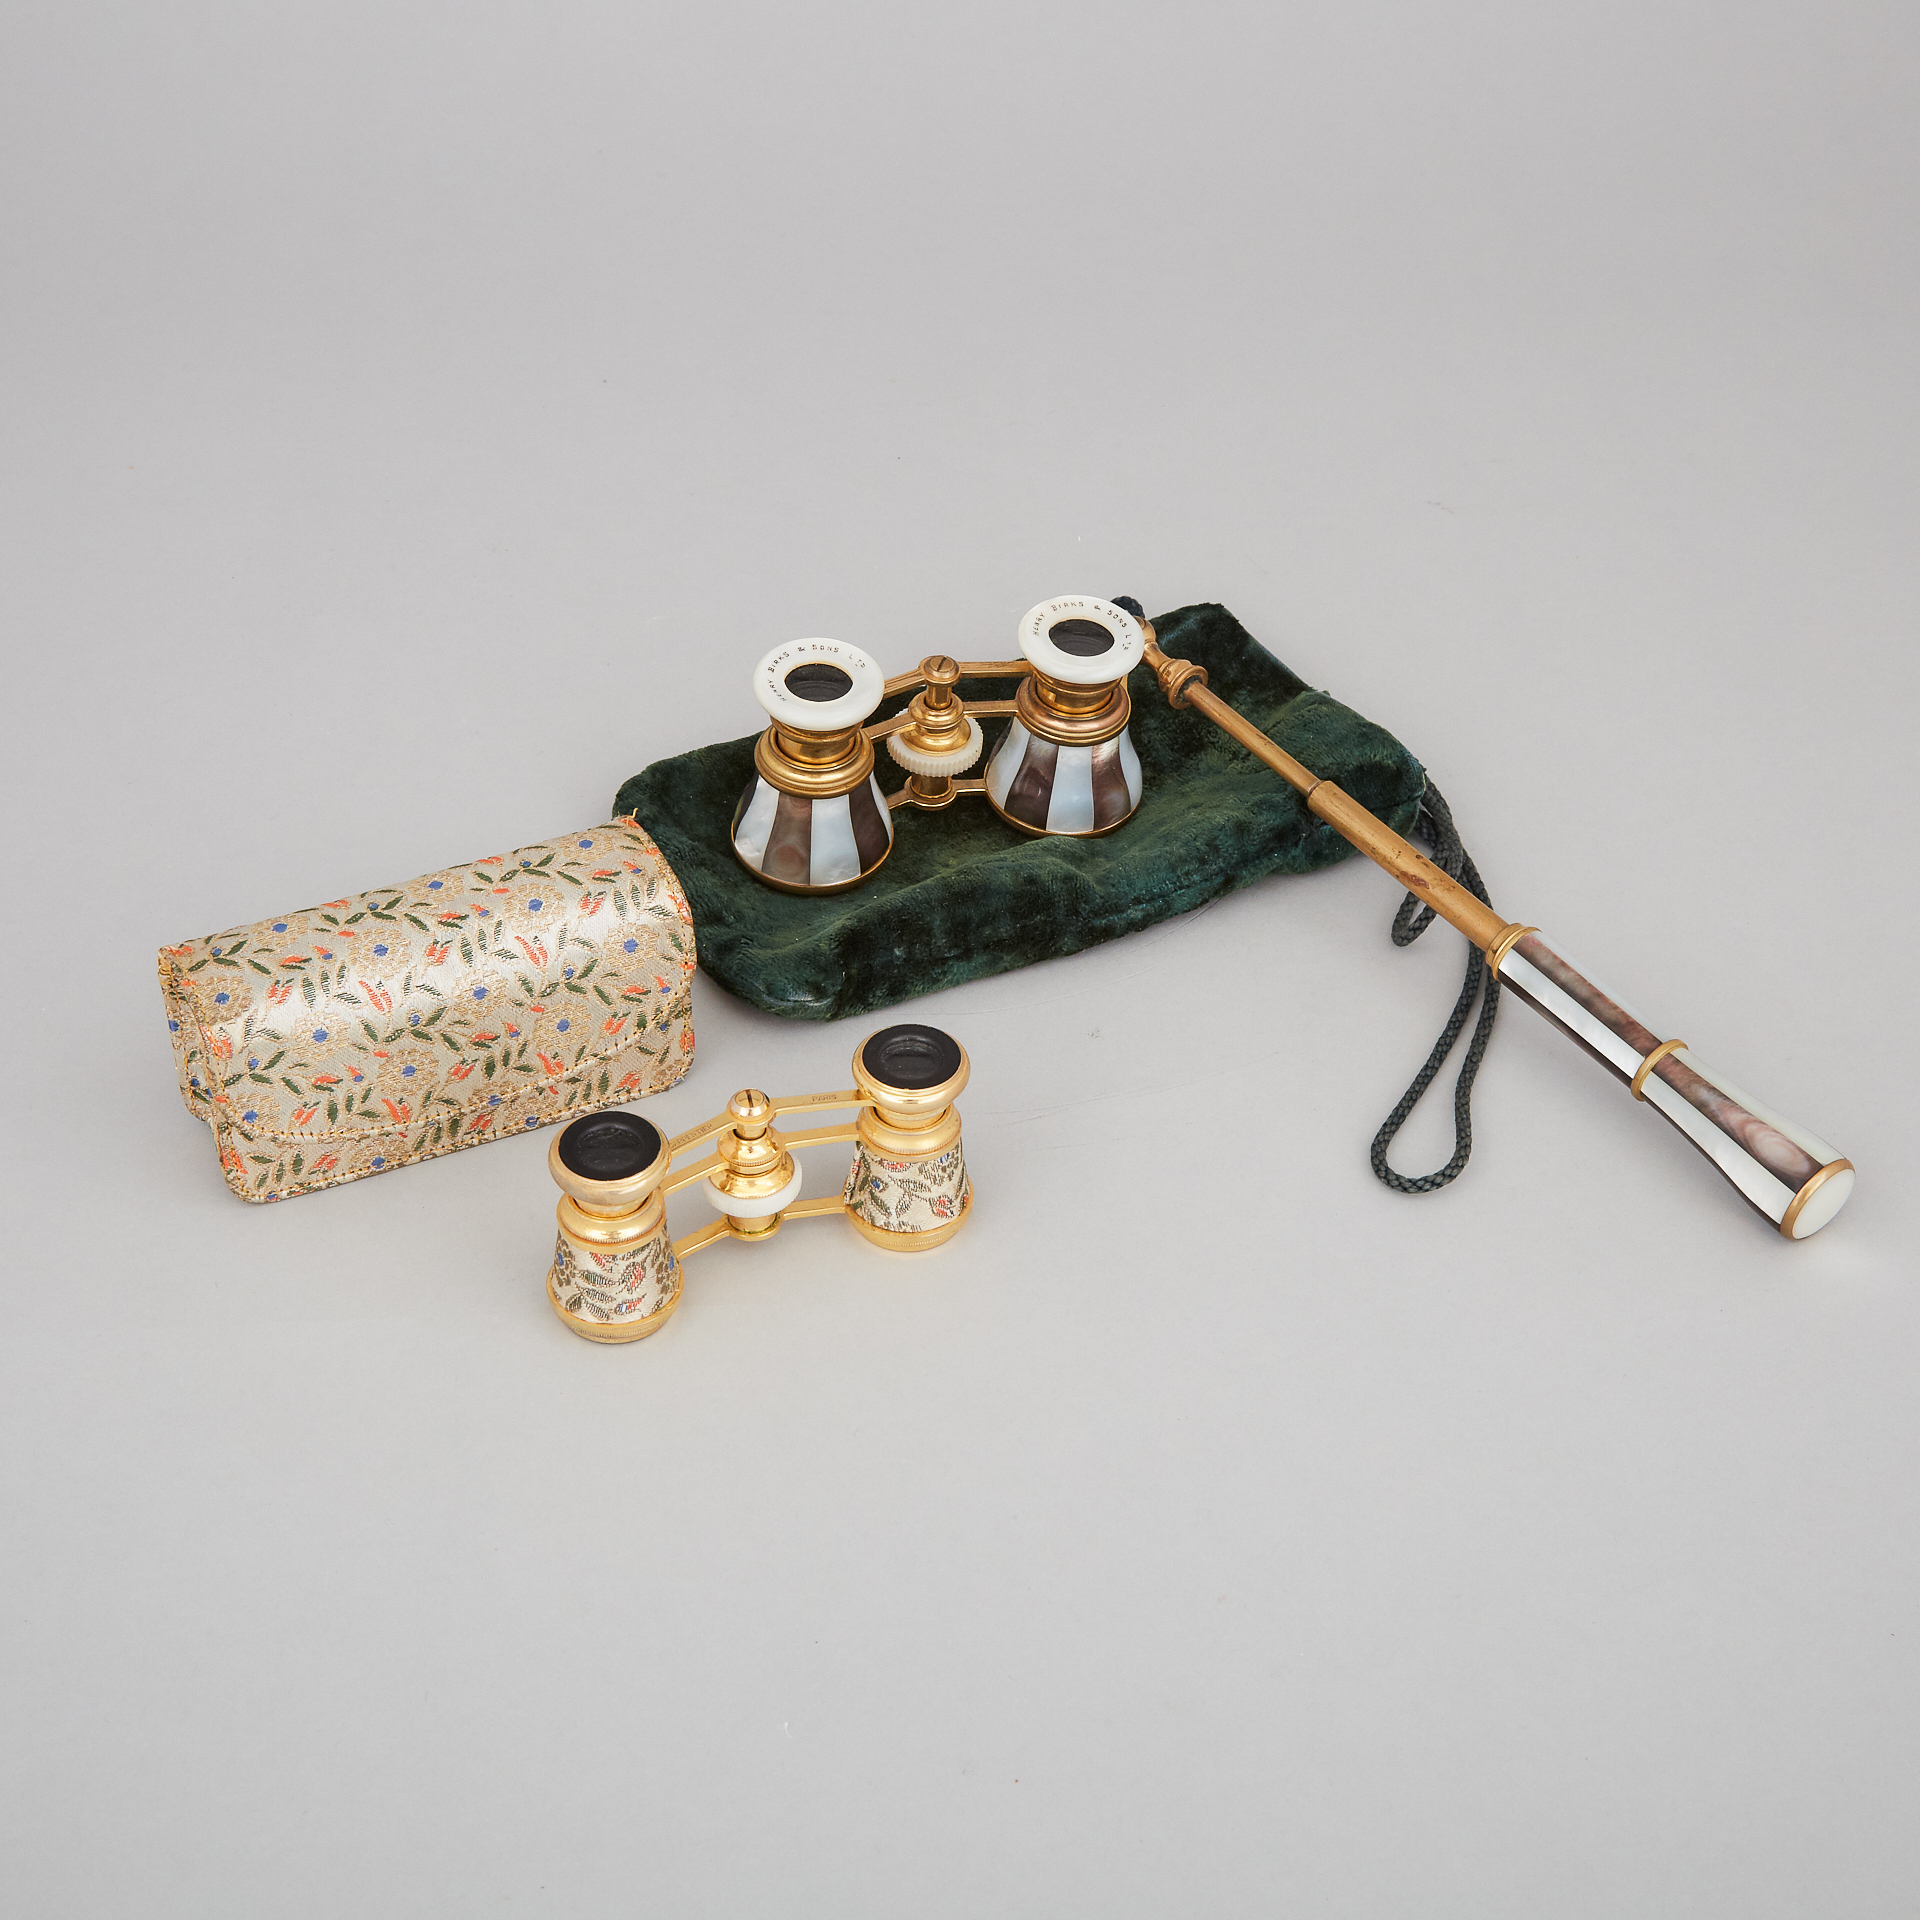 Two Pairs of French Opera Glasses, 20th century